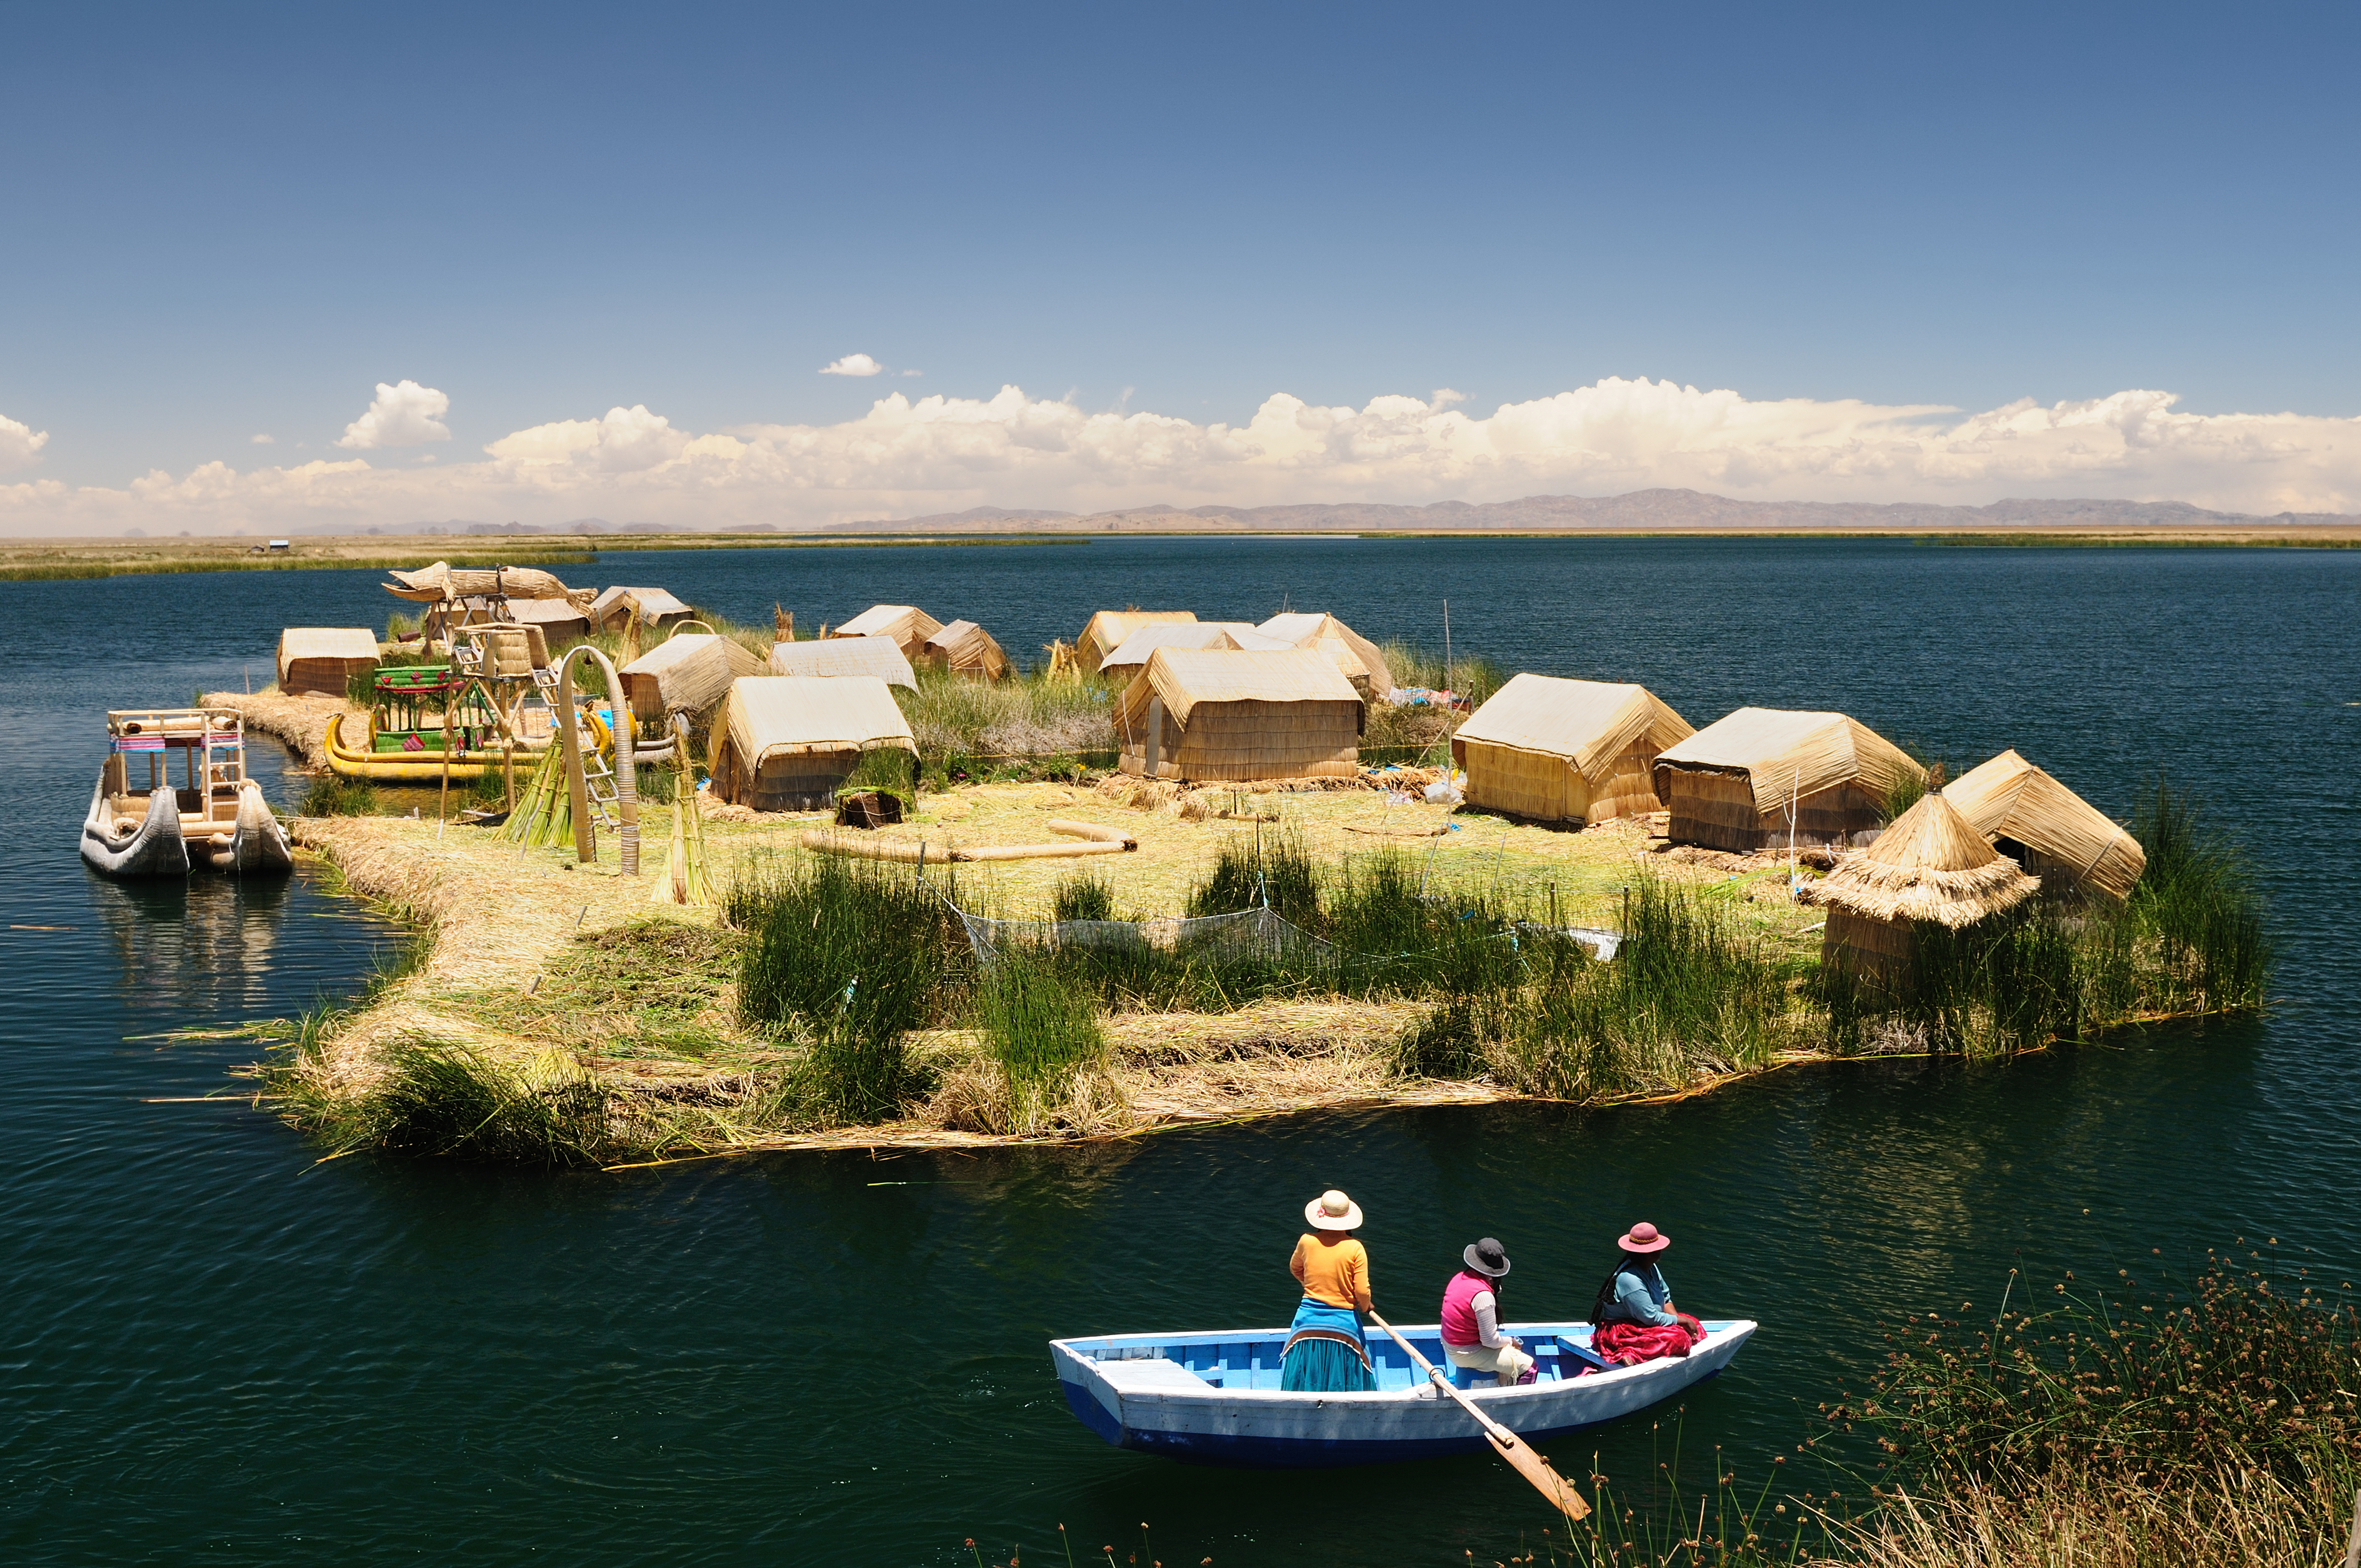 floating Uros islands on the Titicaca lake, the largest highaltitude lake in the world (3808m). Theyre built using the buoyant totora reeds_96802072-1